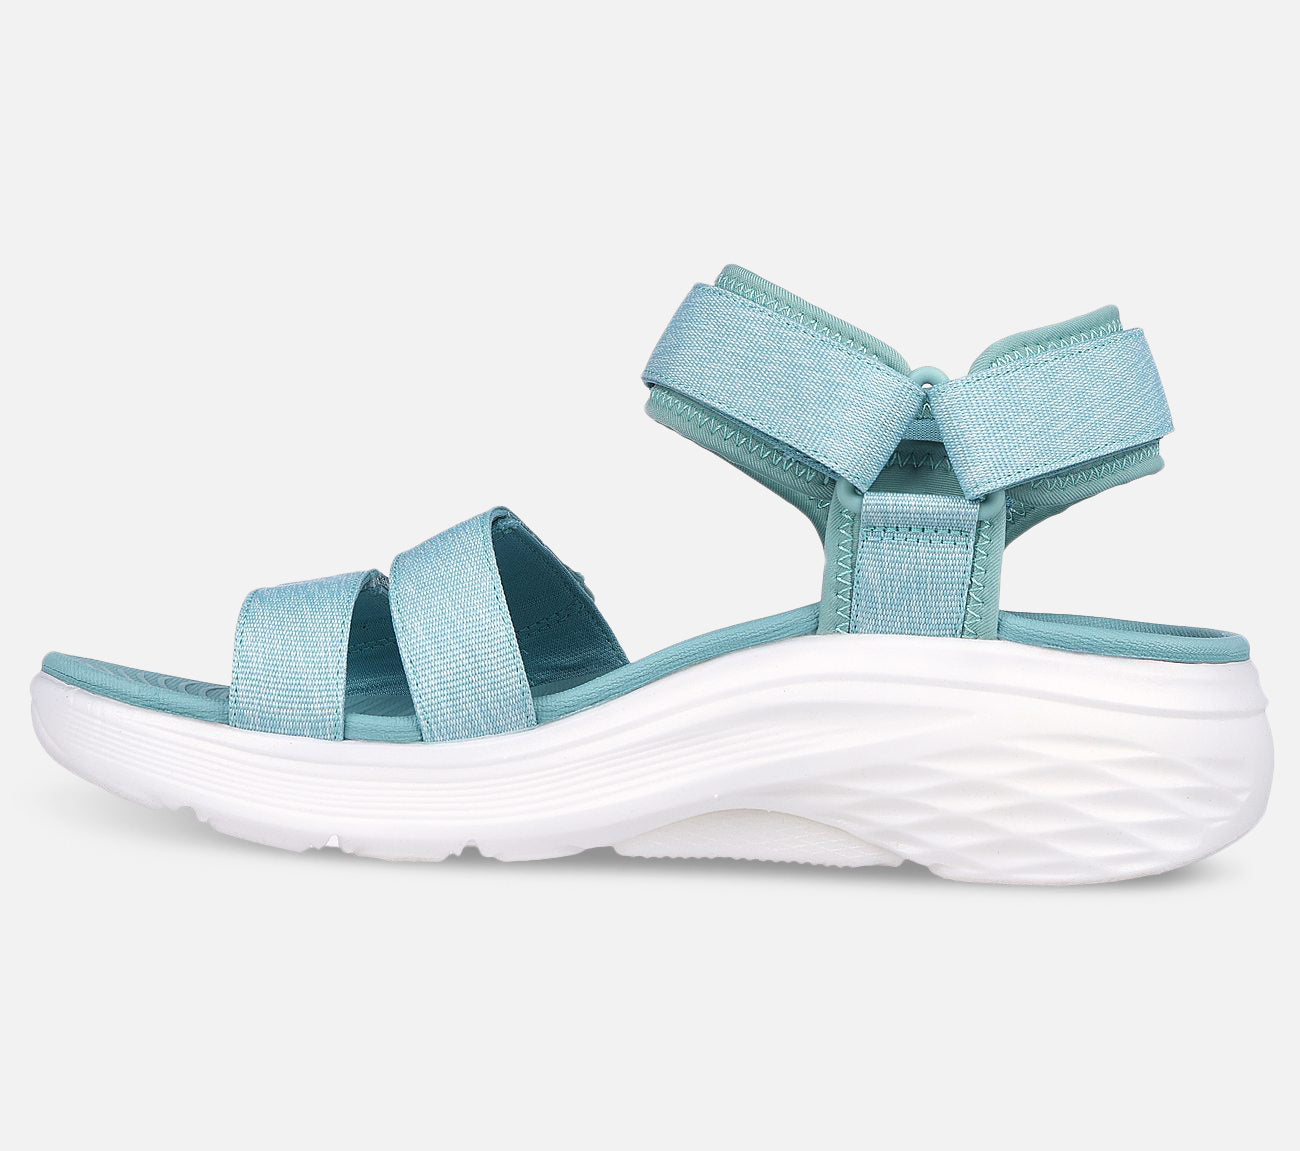 Max Cushioning Arch Fit Prime Sandal Skechers